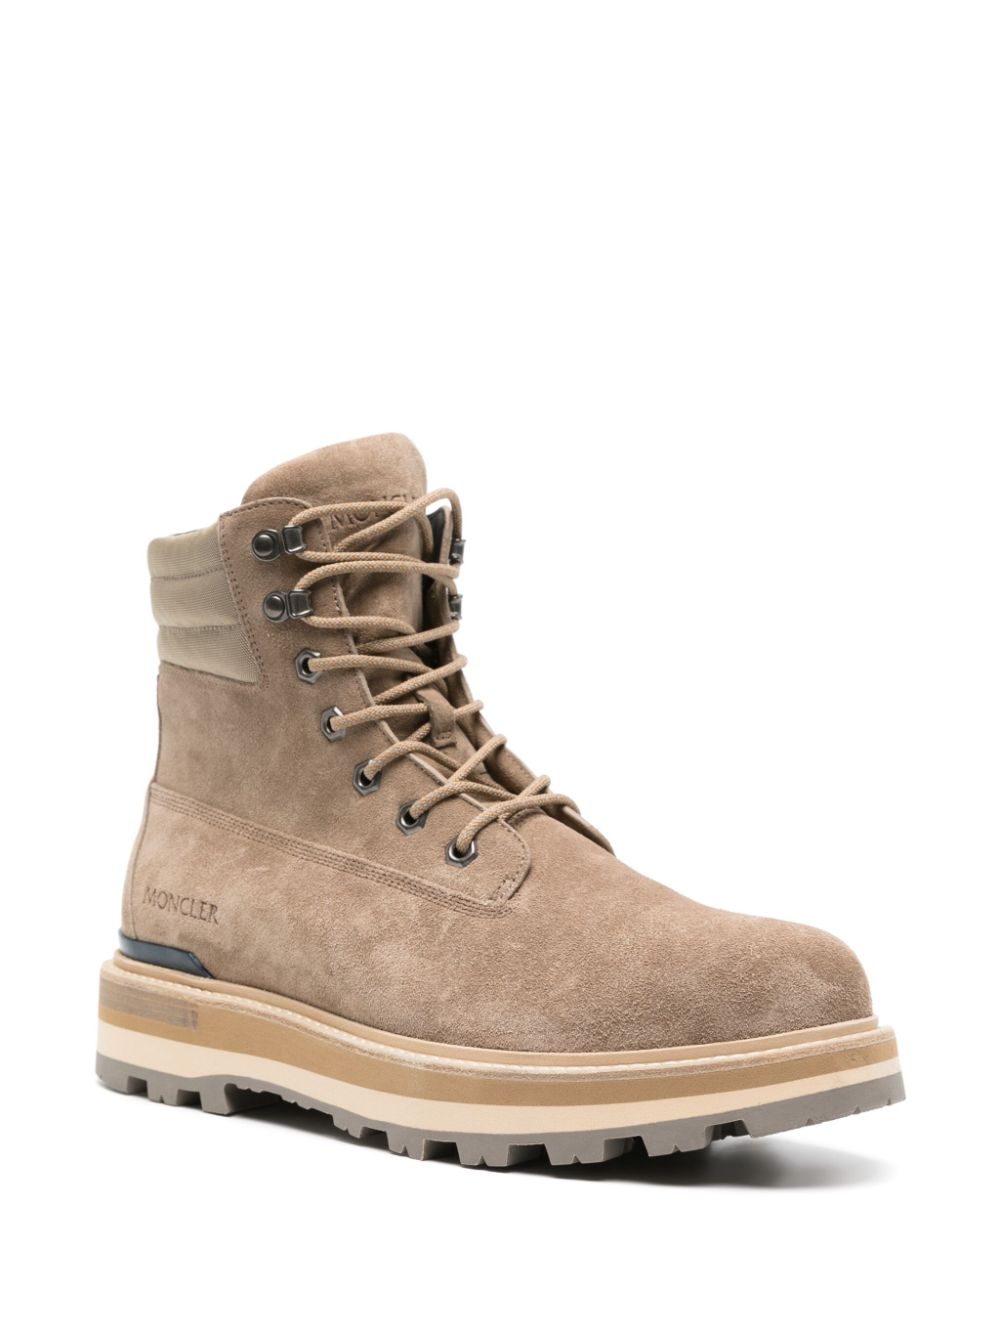 Moncler Peka suede hiking boots - Beige